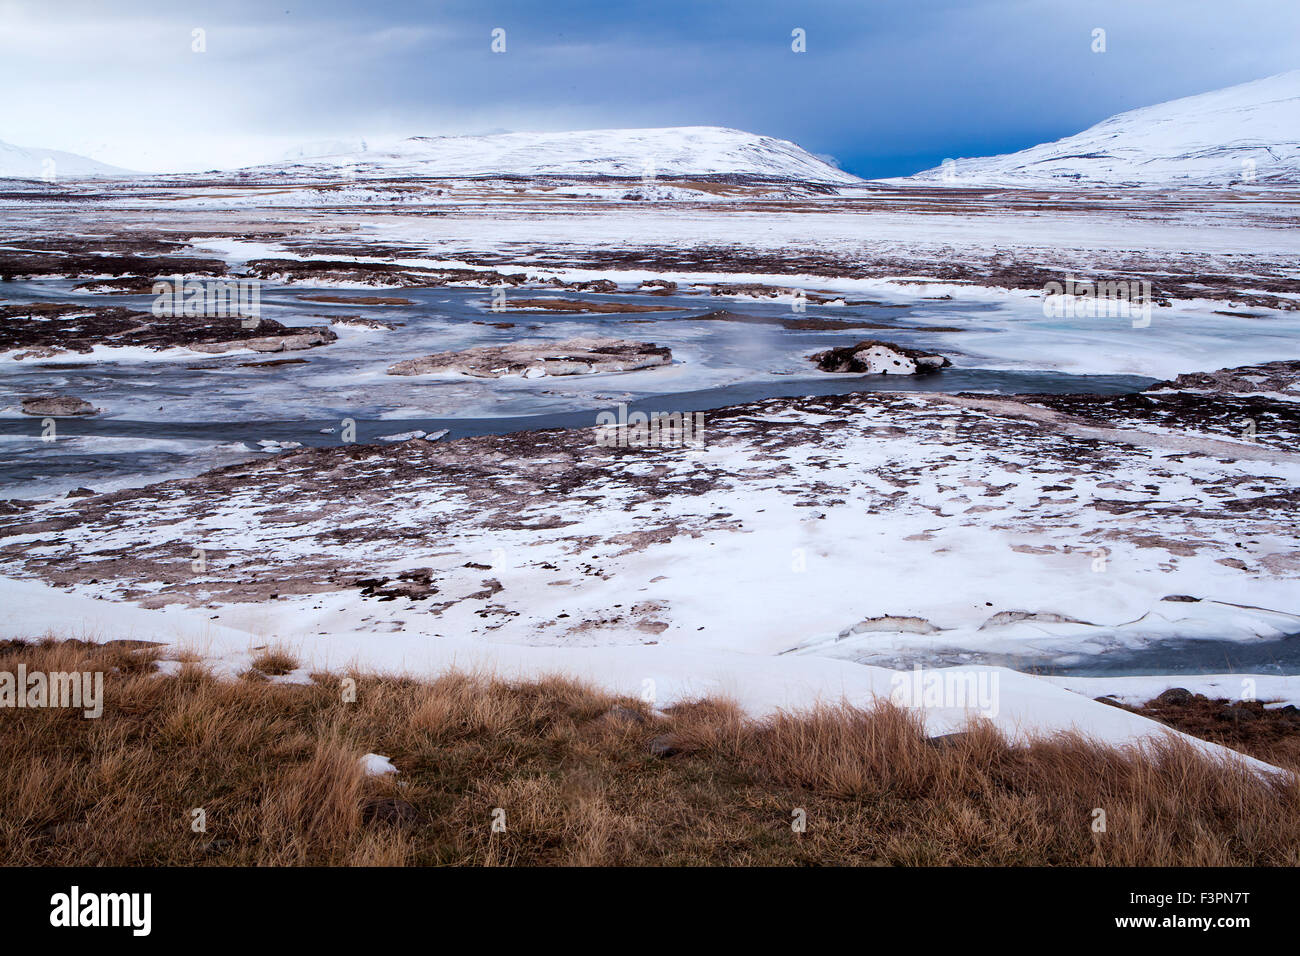 Wide lens capture of volcanic mountain landscape in wintertime, Iceland Stock Photo